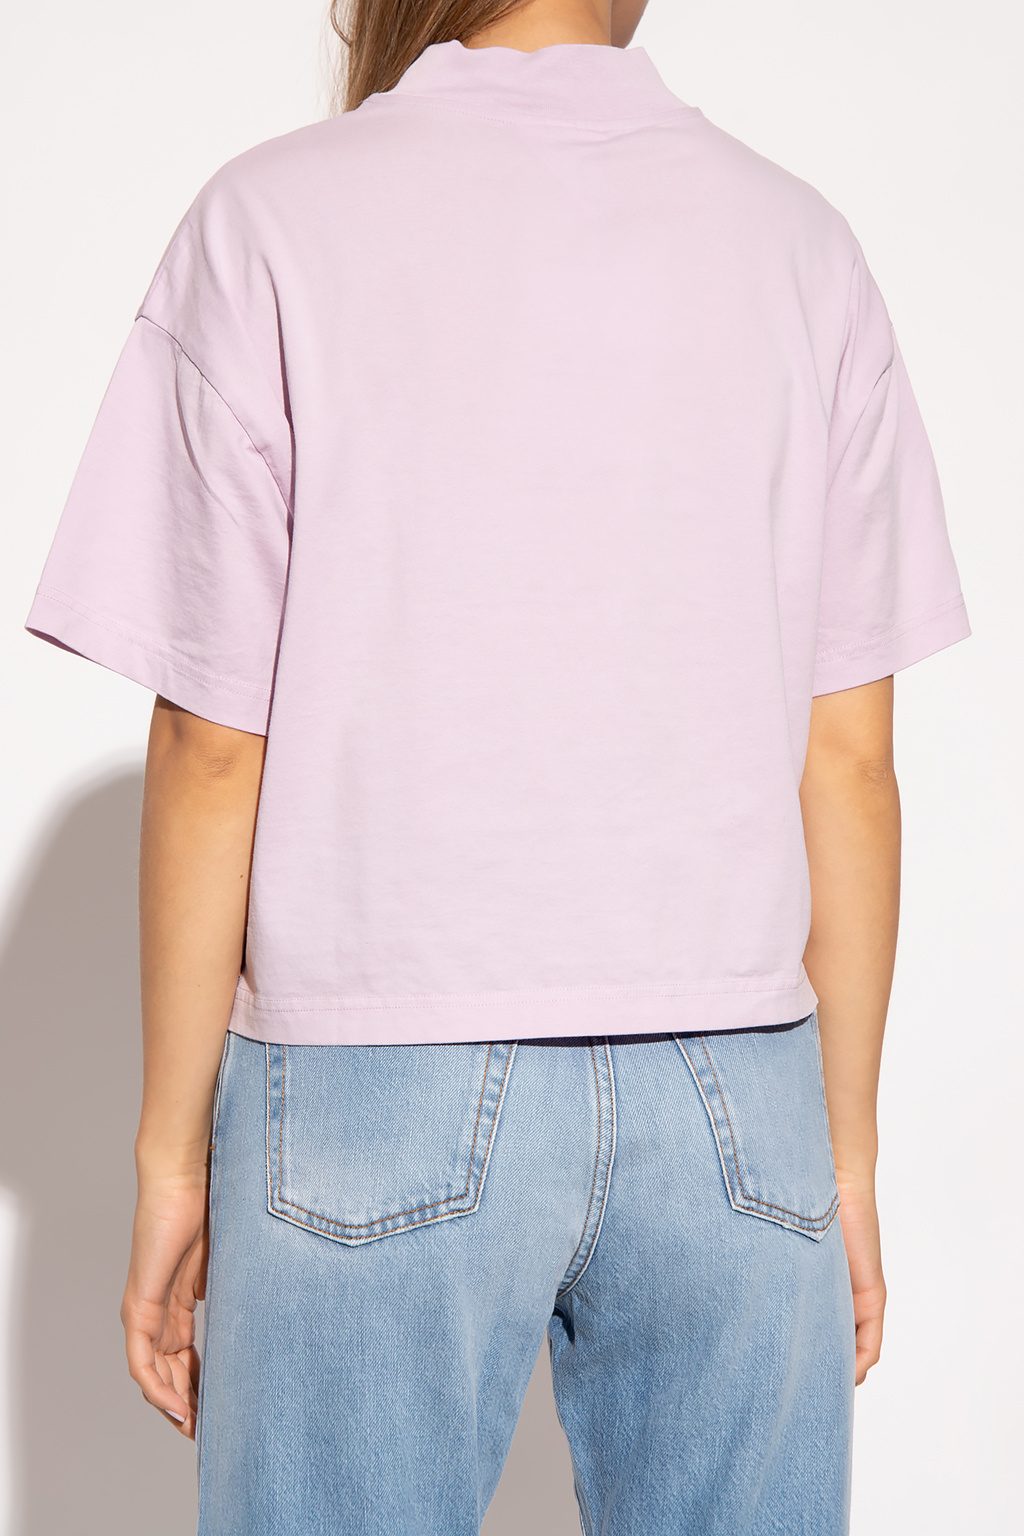 Acne Studios Relaxed-fitting T-shirt